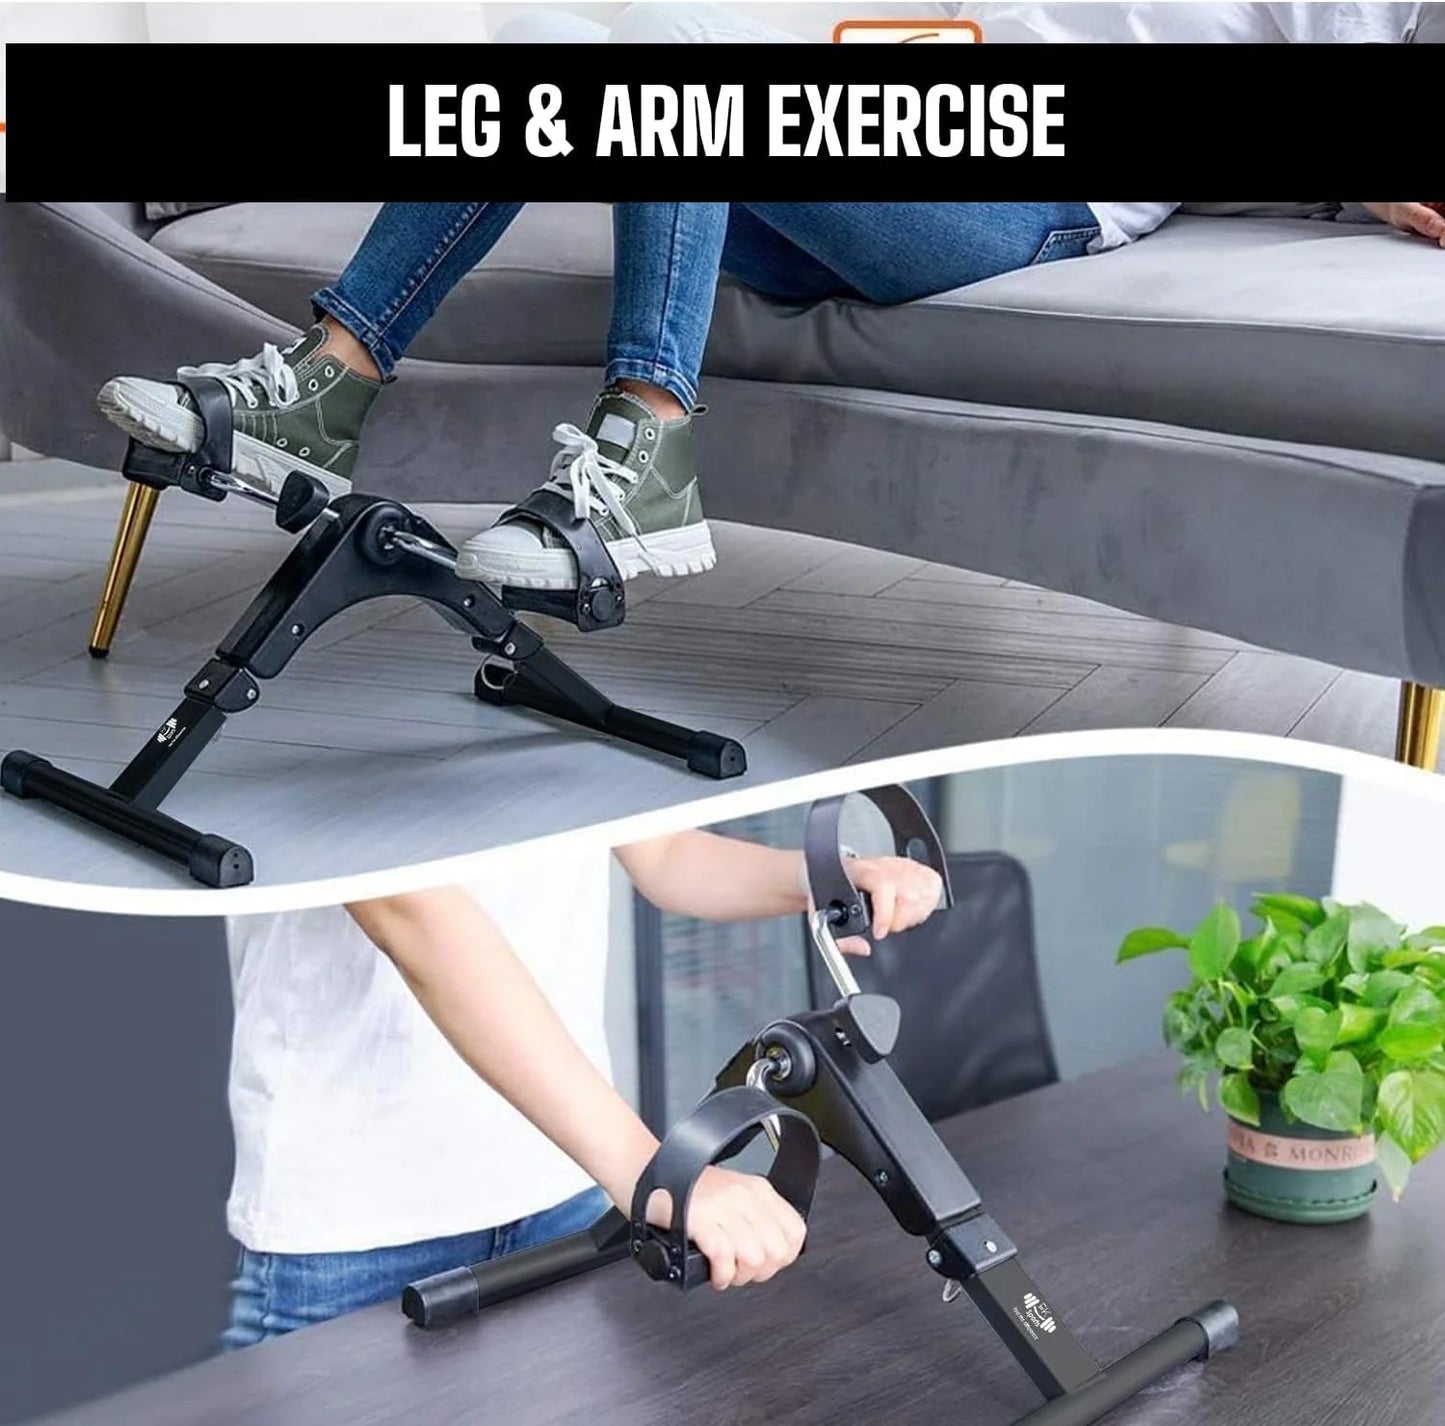 Mini Paddle Exercise Cycle (Best For Foot & Arms)